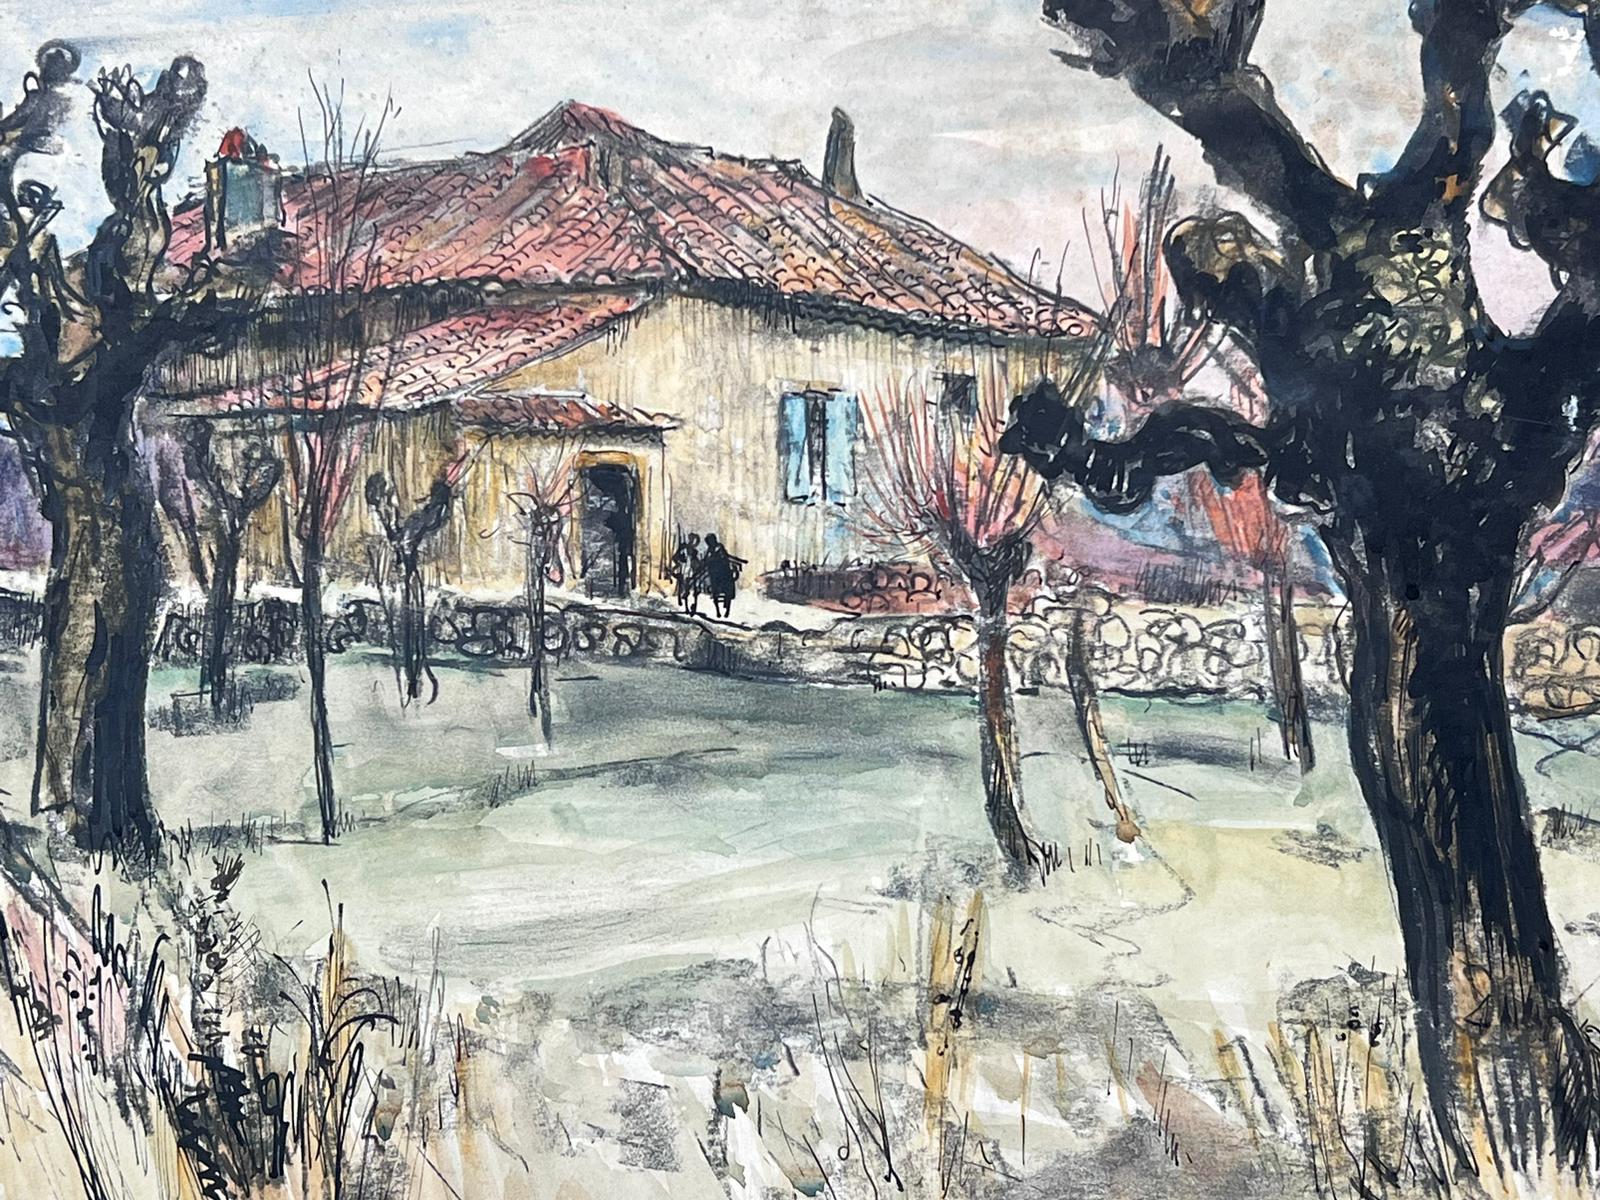 Provence
Jean La Forgue (French 1901-1975) 
signed watercolour, ink on paper, mounted in a card frame
inscribed verso
card frame: 17 x 22 inches
painting: 12 x 17 inches
provenance: the artists estate, France
condition: very good and sound